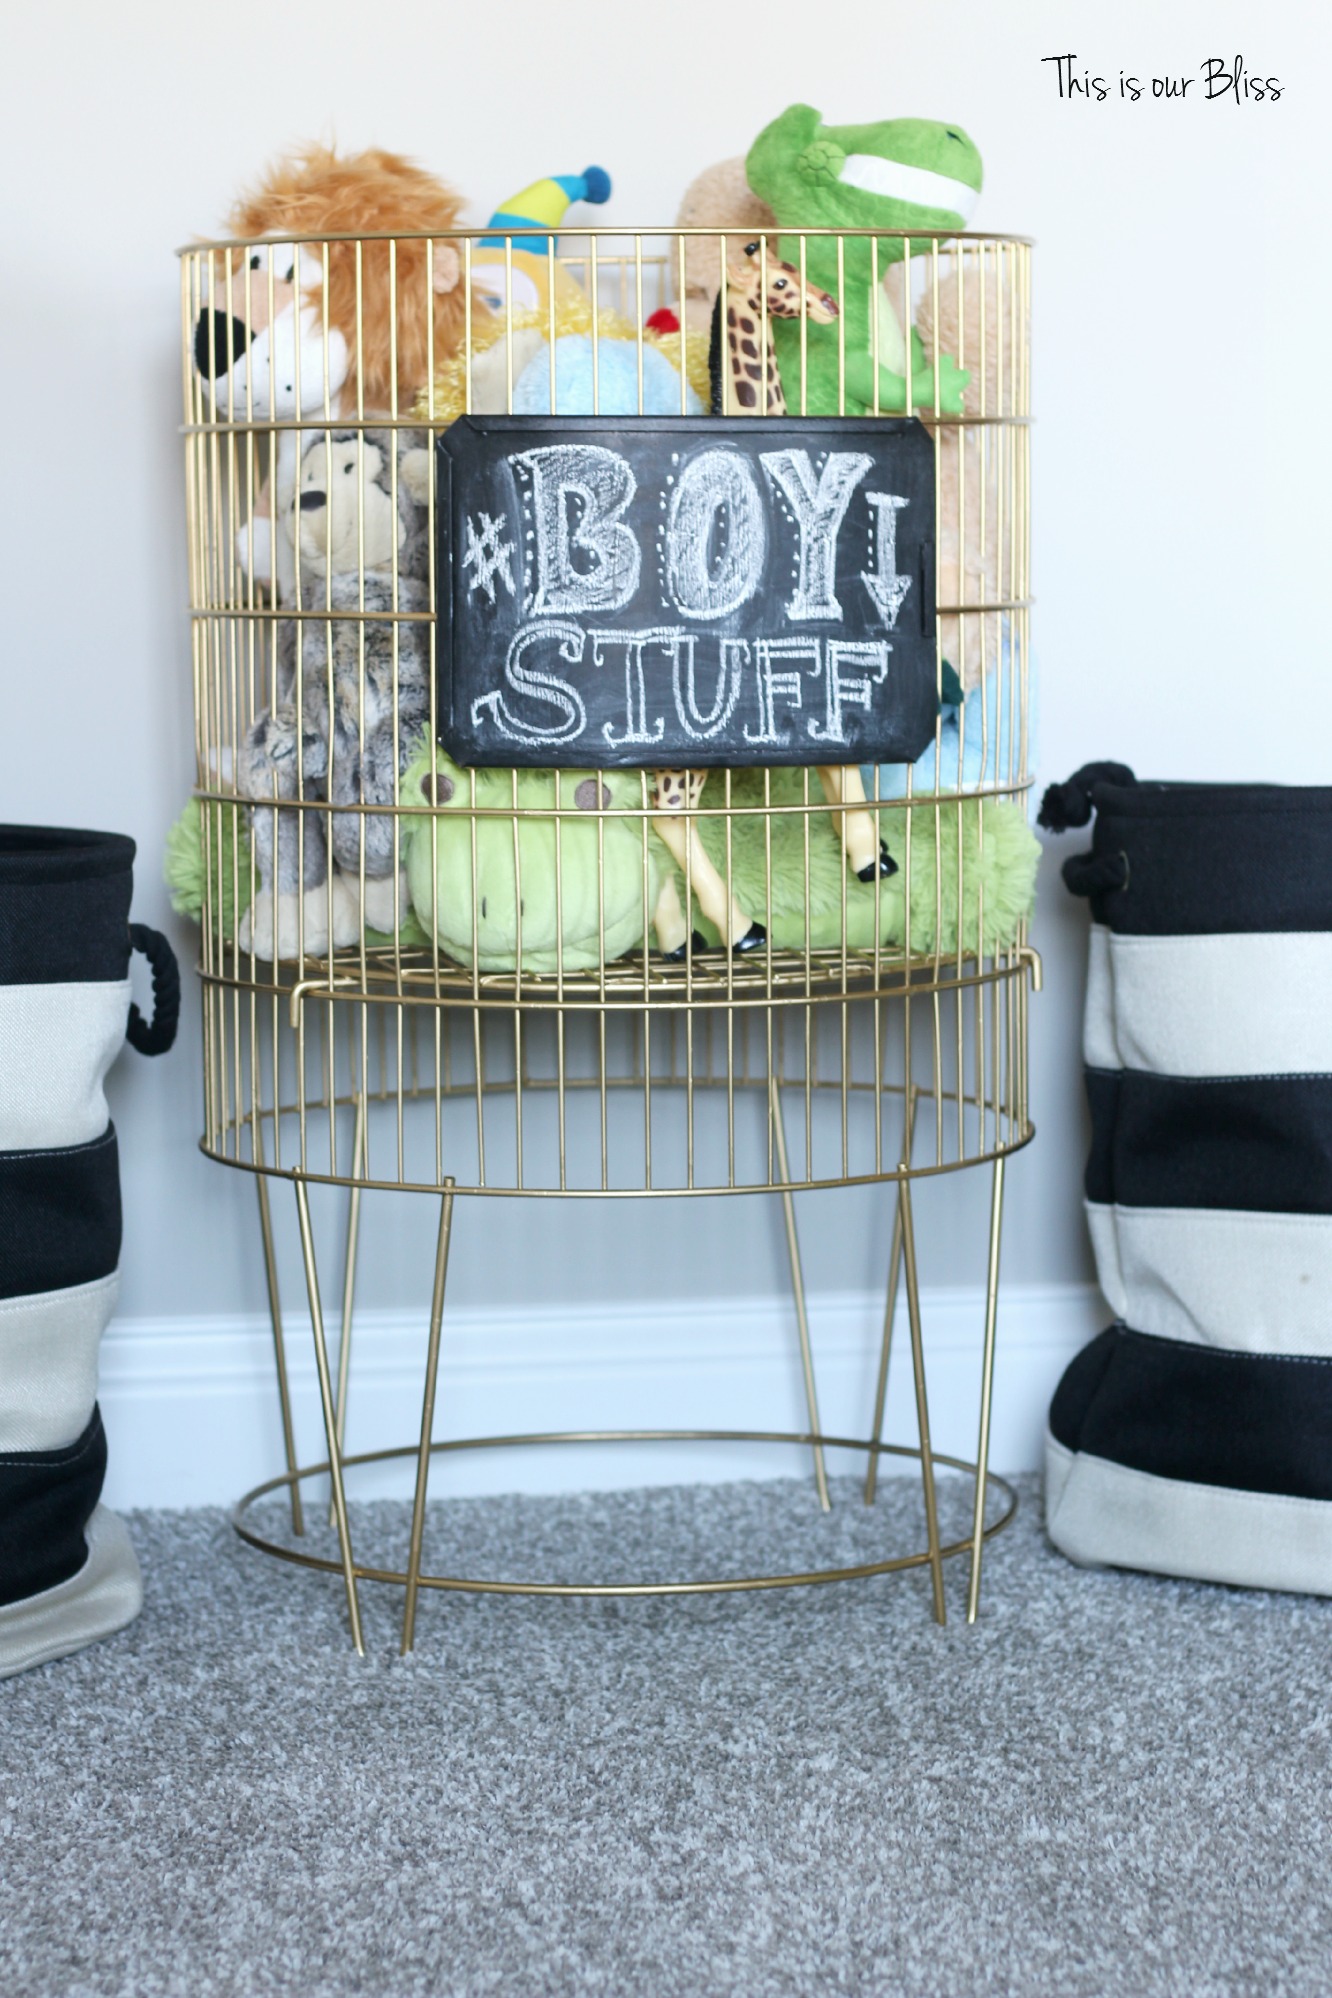 Gold Metal Toy Bin + chalkboard label  Basement playroom accessories -  This is our Bliss